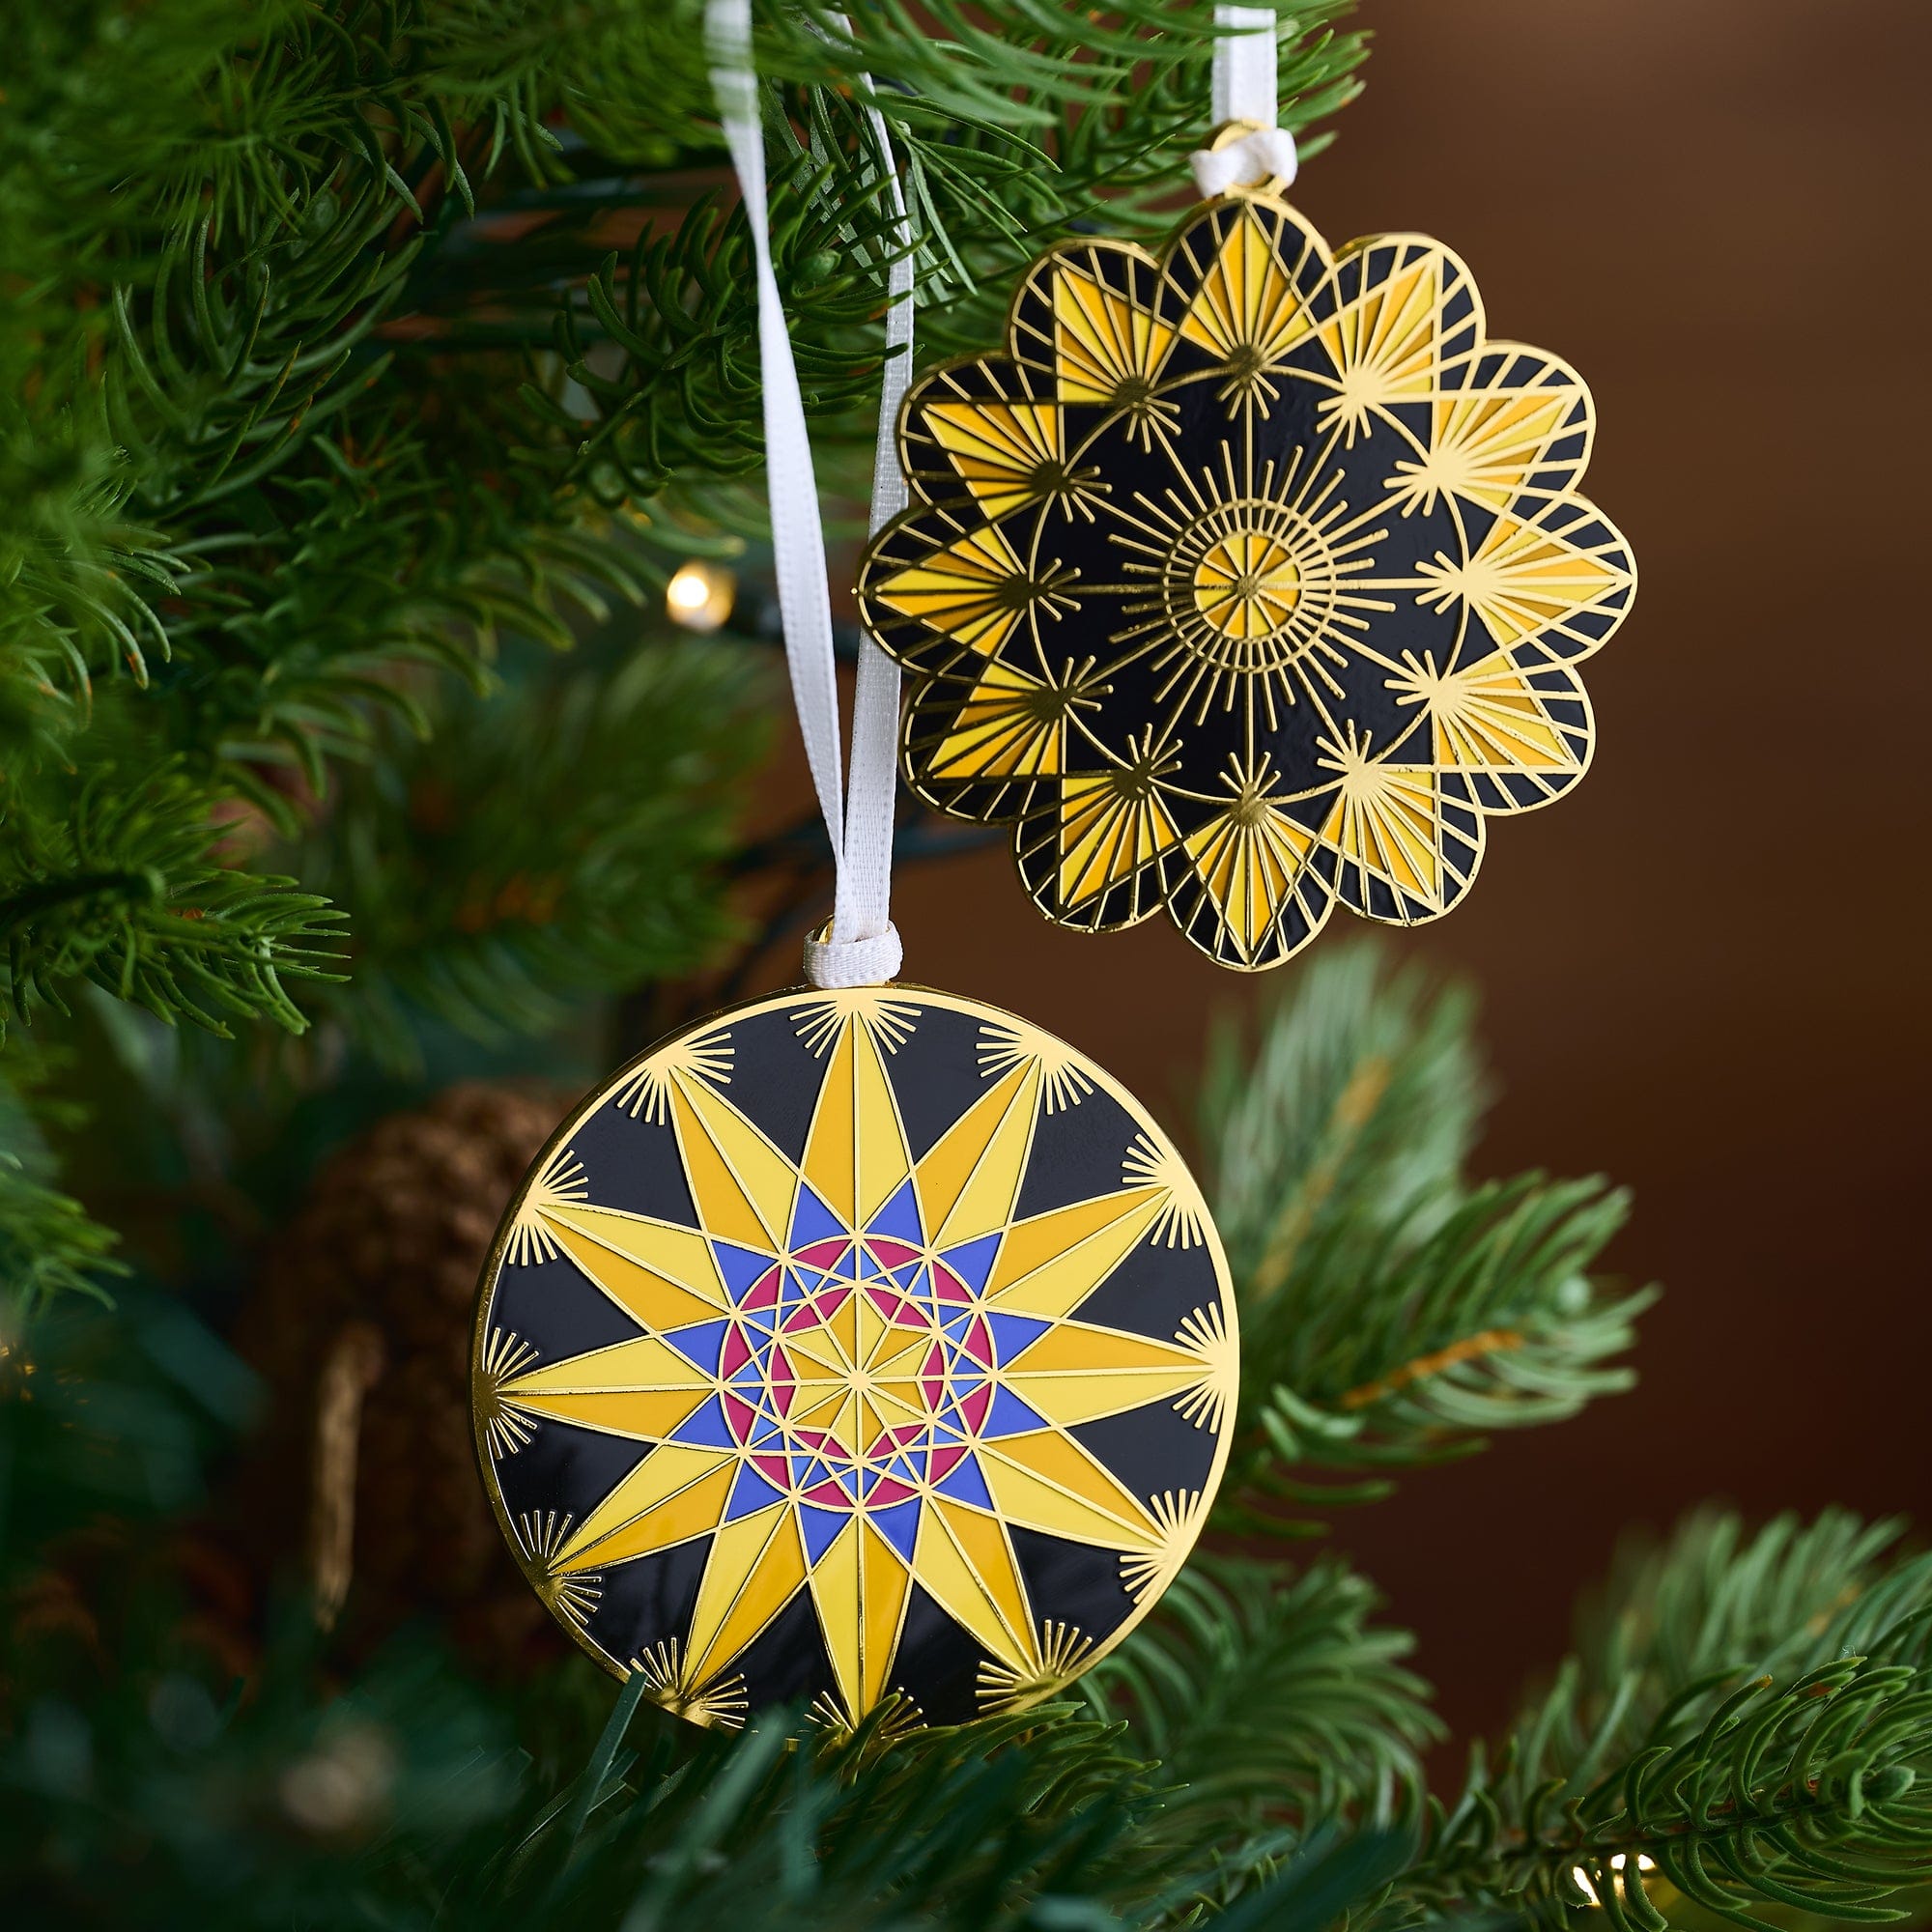 Ukraine Ornaments by VikaVita: Get both 2022 and 2023 designs and save!